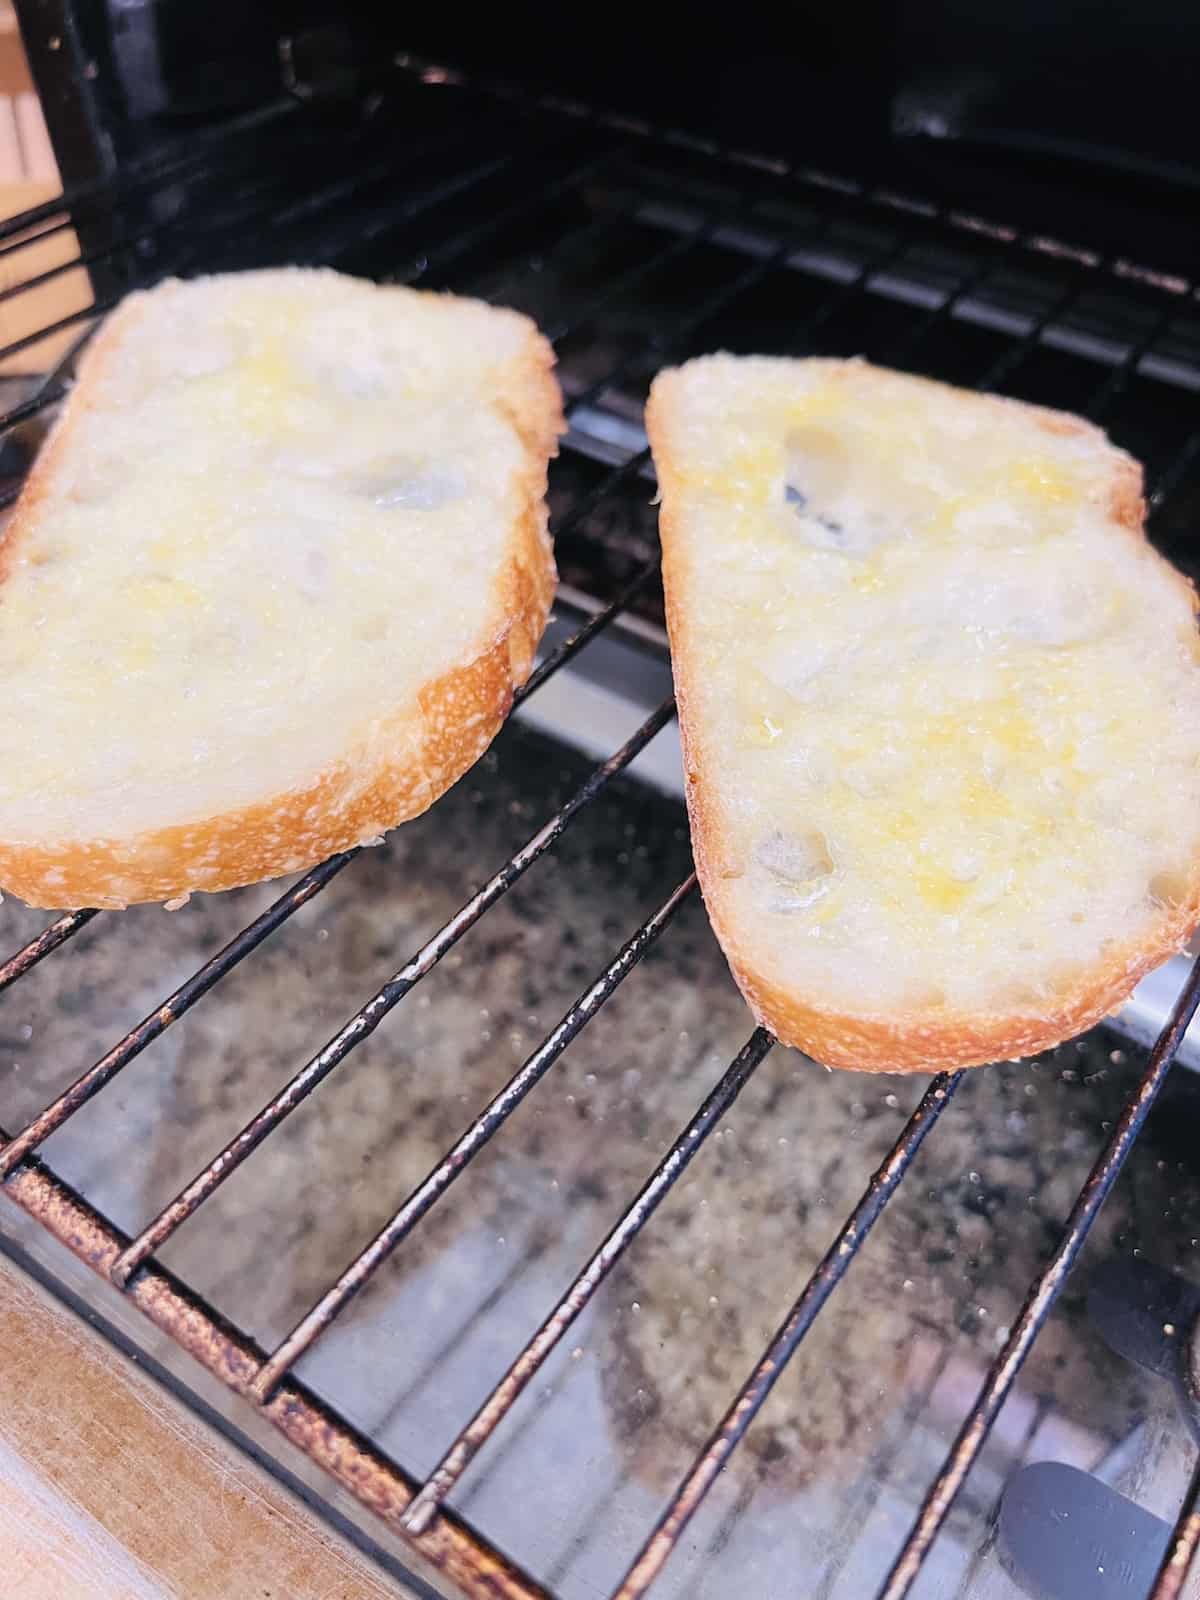 d slices topped with olive oil and garlic in a toaster oven.